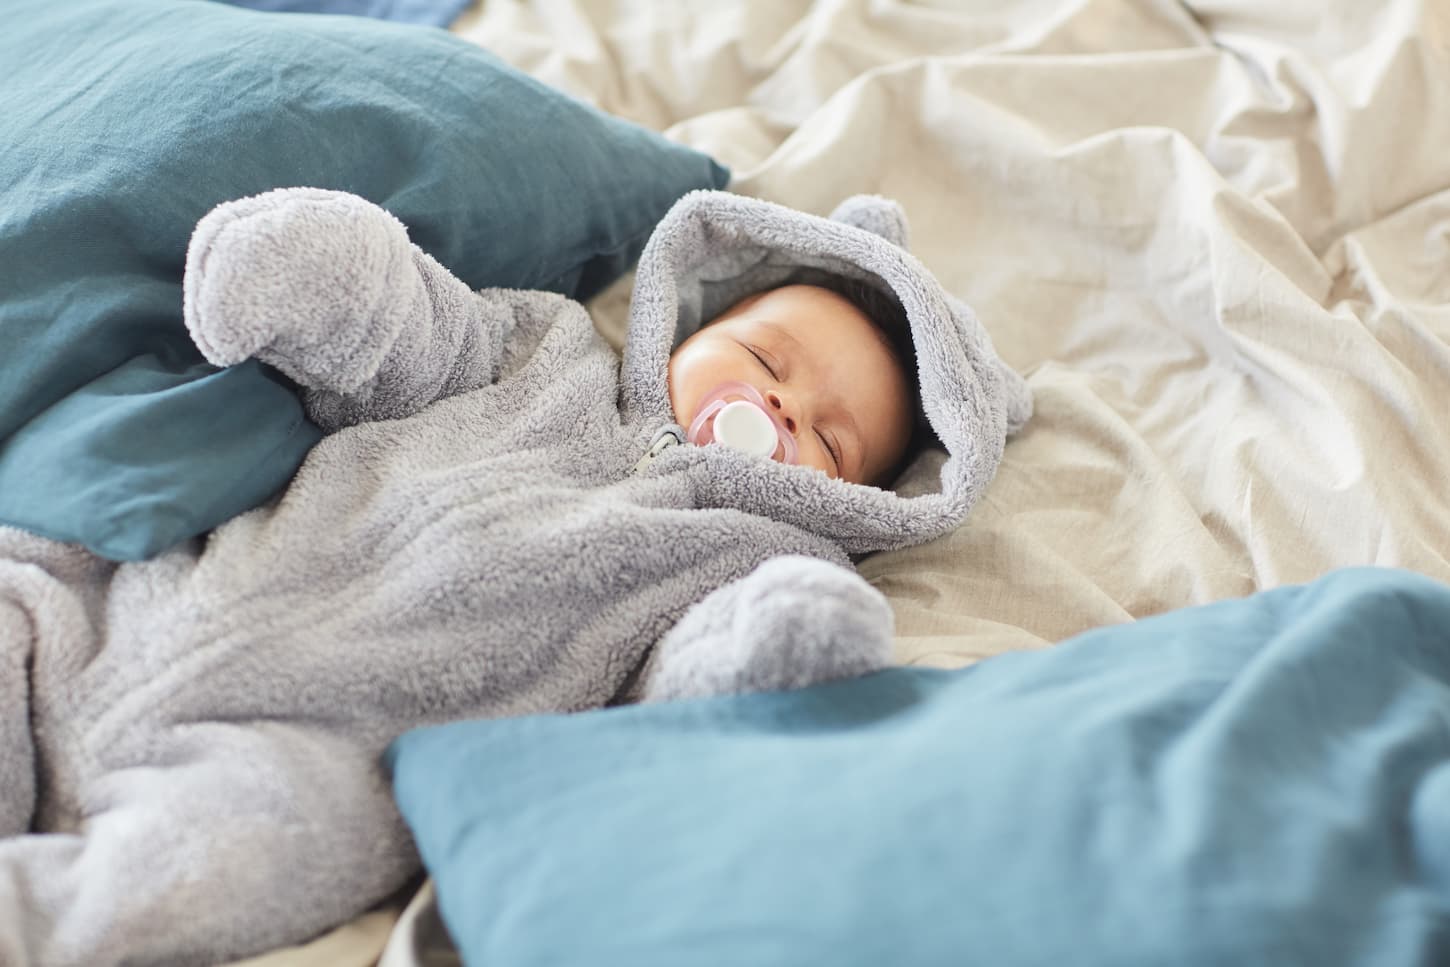 An image of a cute baby wearing a fluffy fleece onesie sucking on a pacifier while sleeping lying on bed blankets.